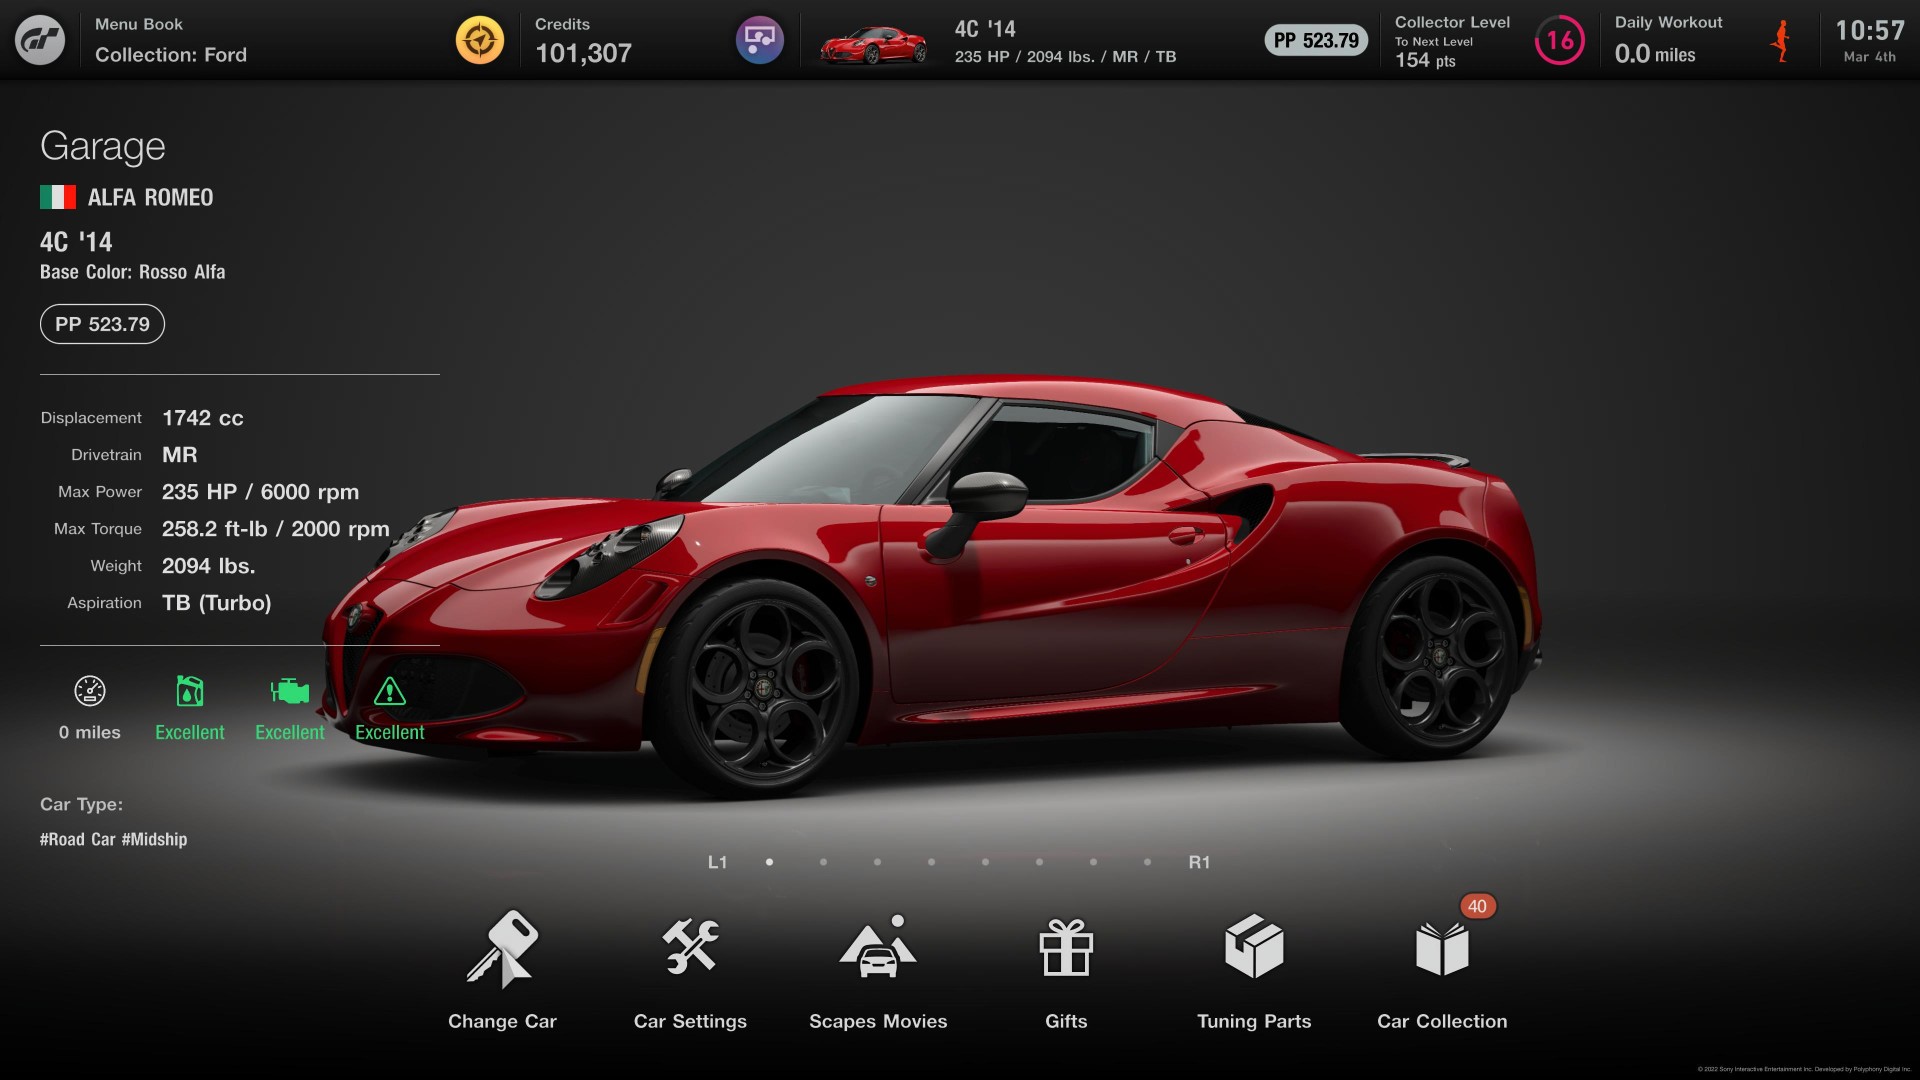 Gran Turismo 7 Review: Appealing to the car collector fantasy